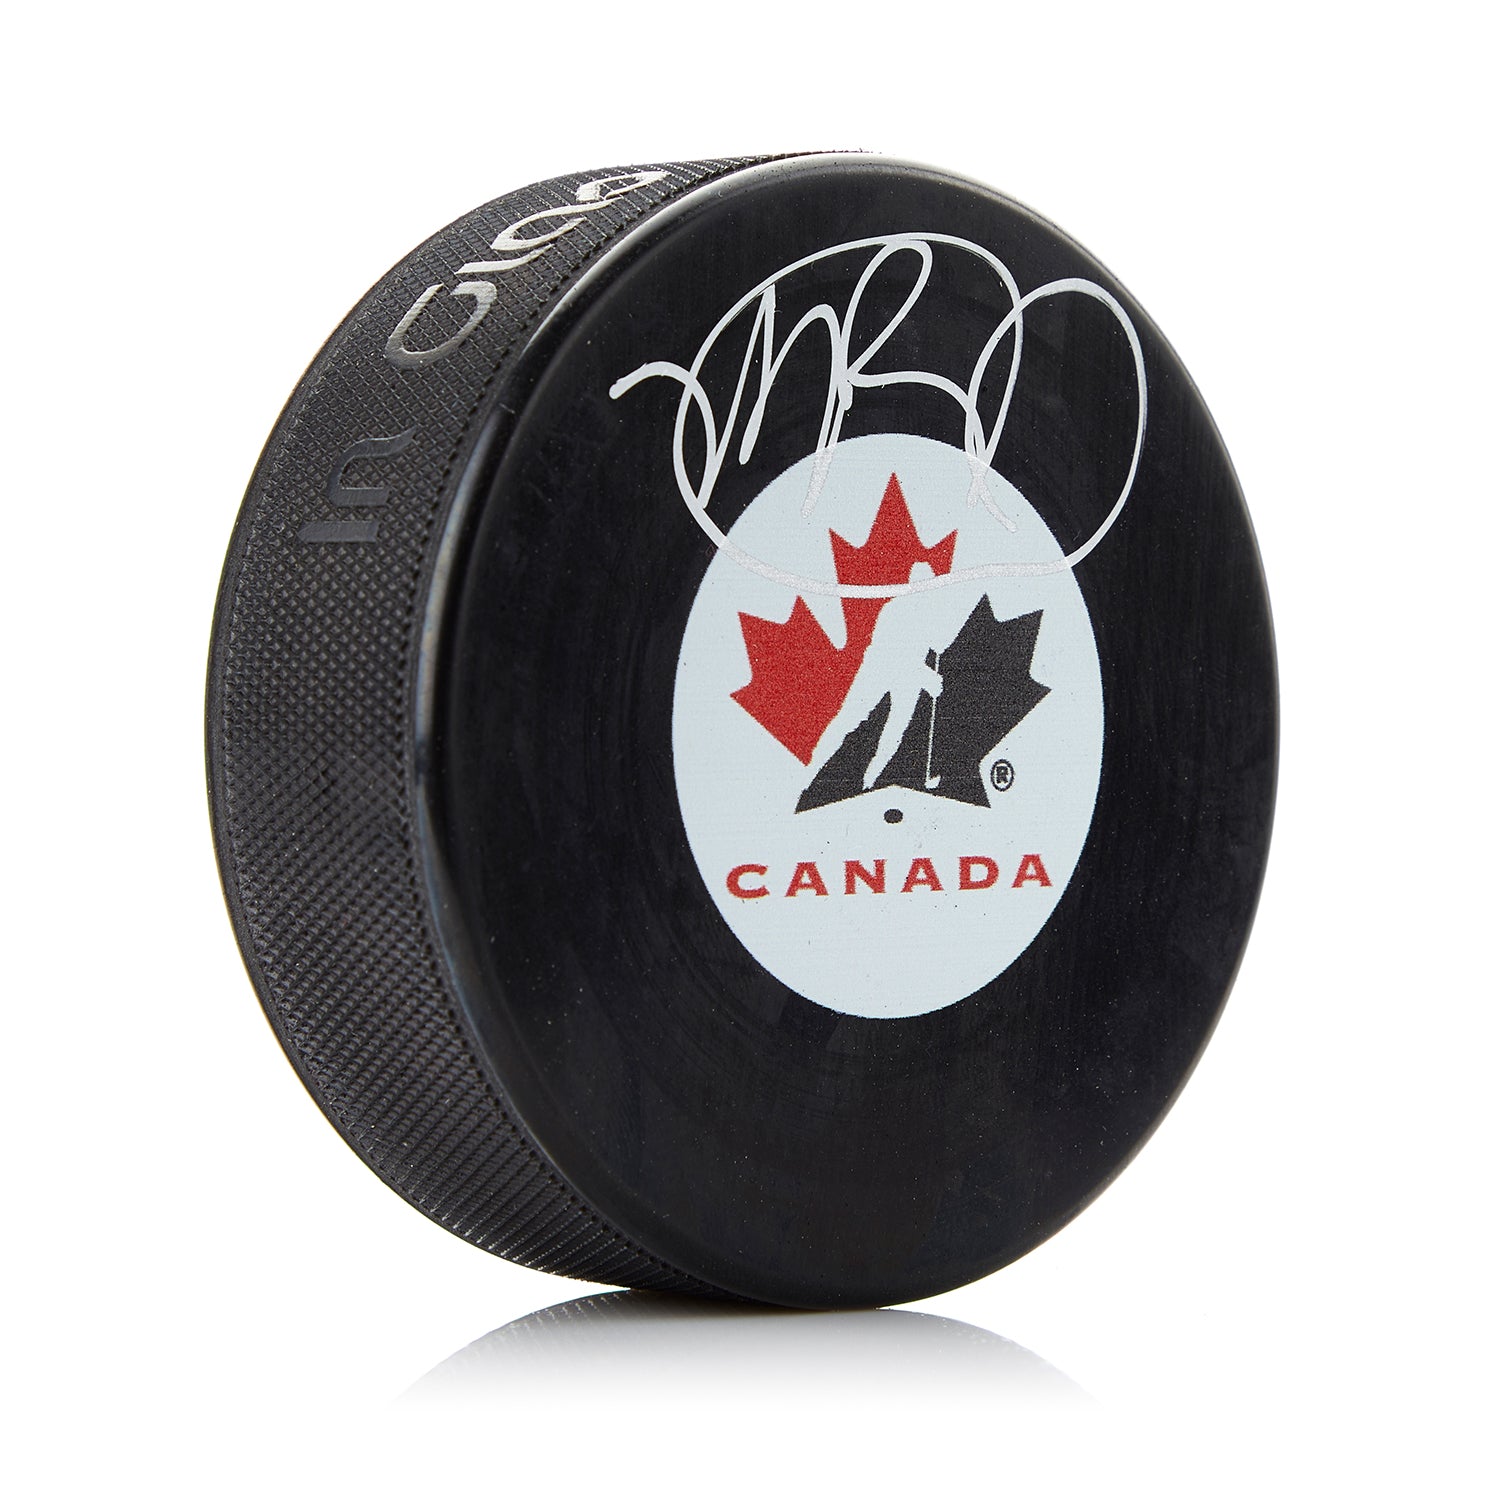 Mike Babcock Team Canada Autographed Hockey Puck